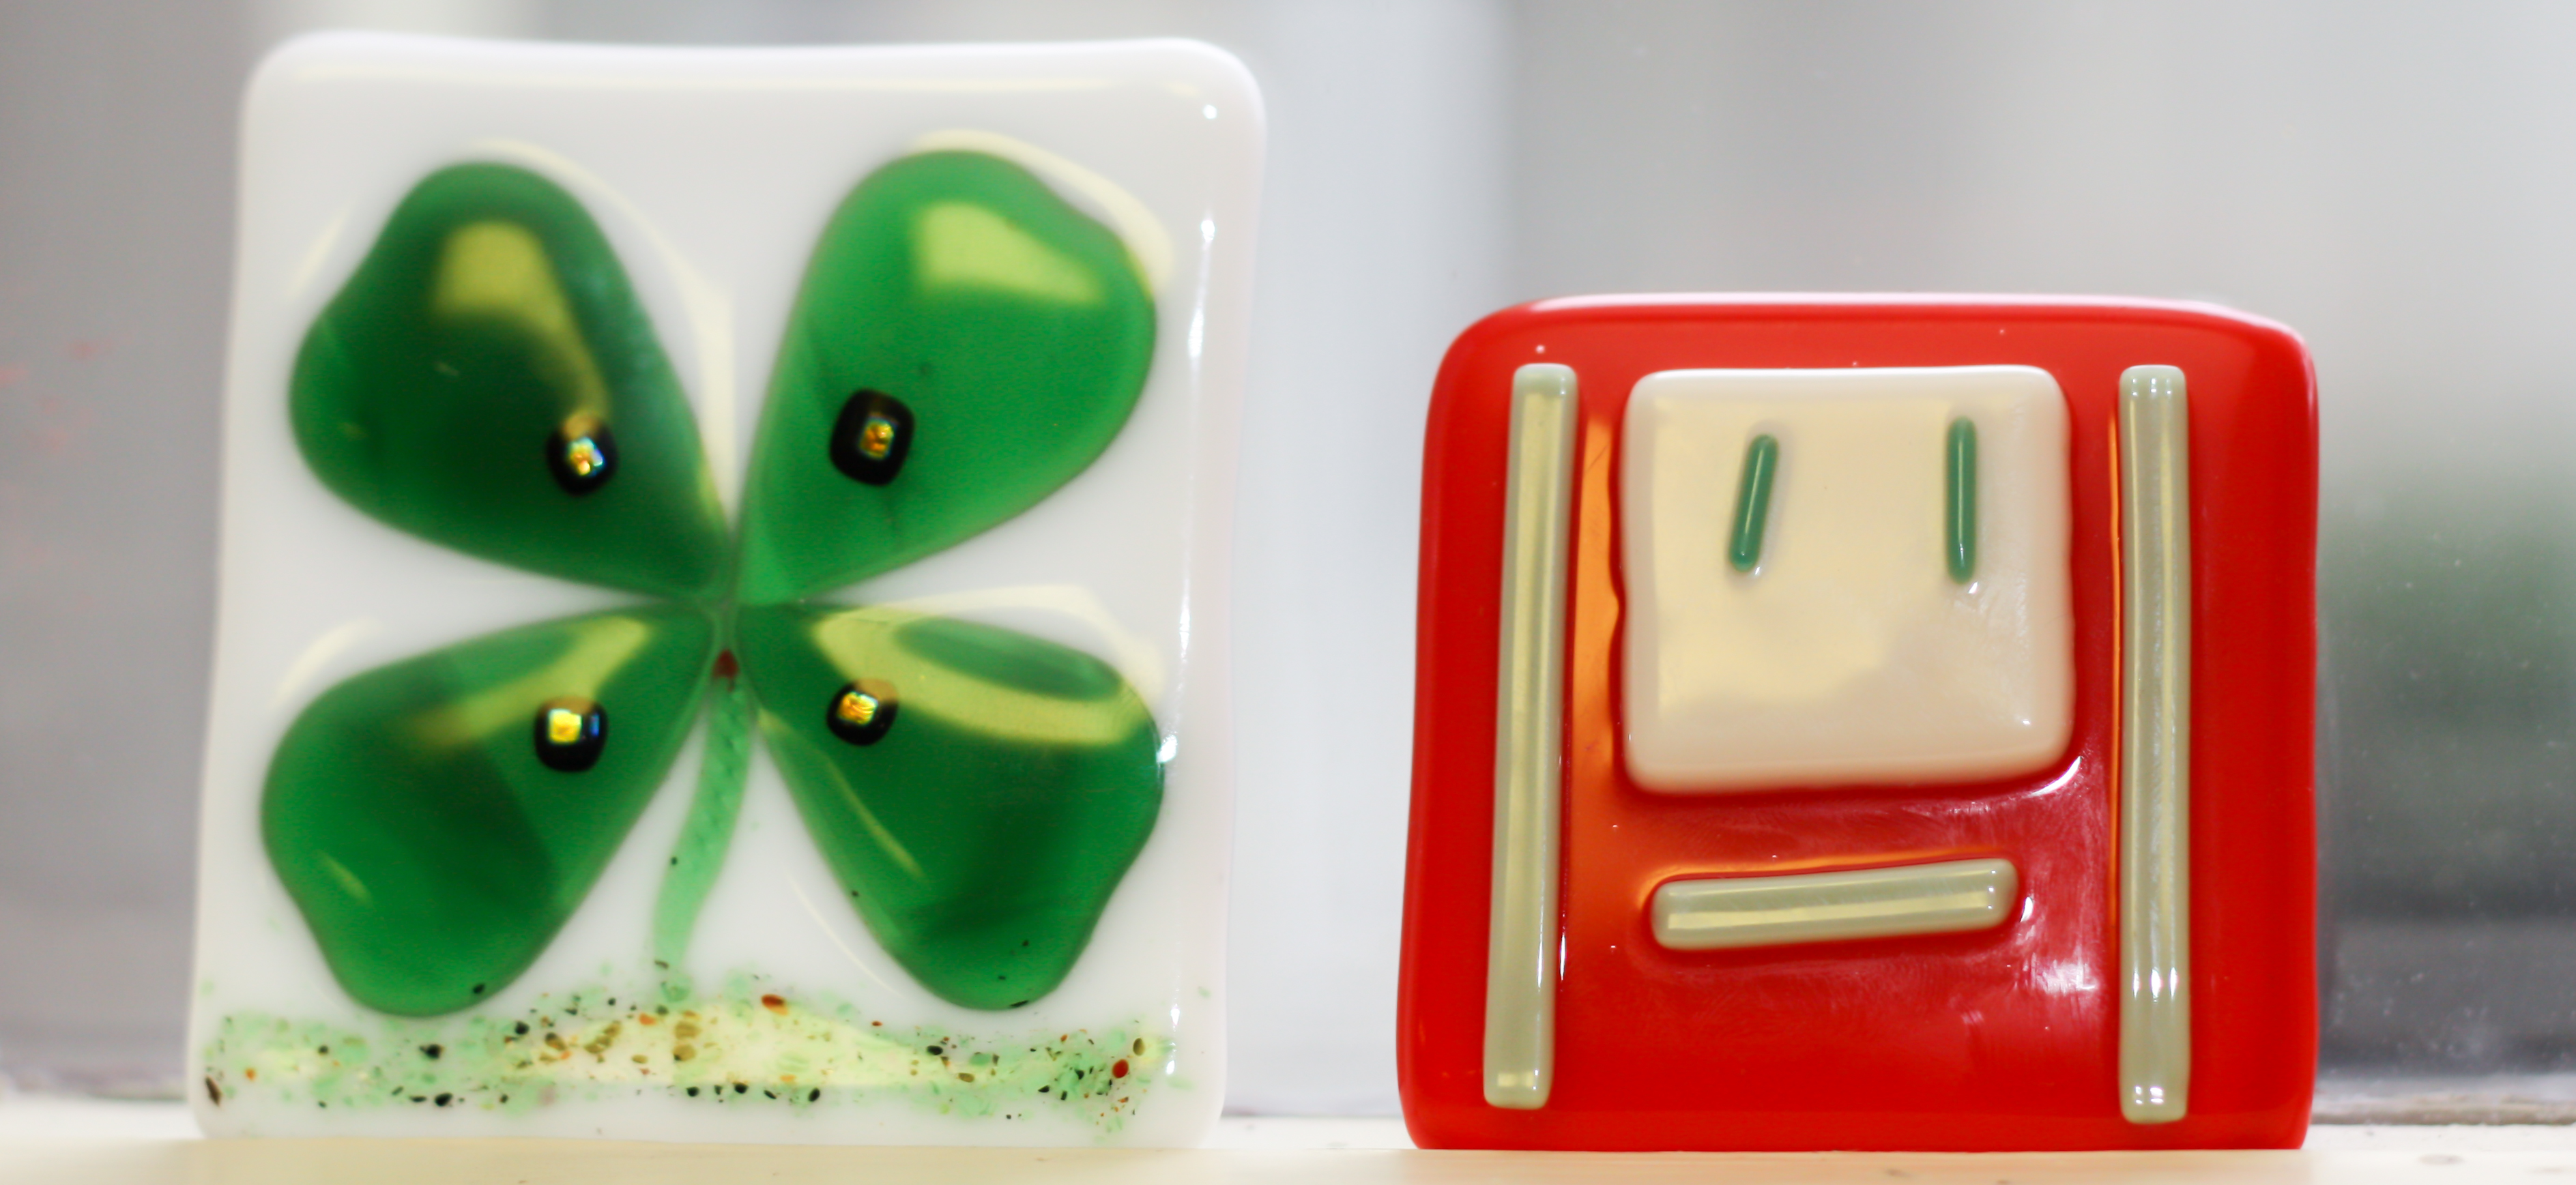 On left: White glass fused magnet with green clover design. On right: Red glass fused magnet with white rectangles of varying sizes.